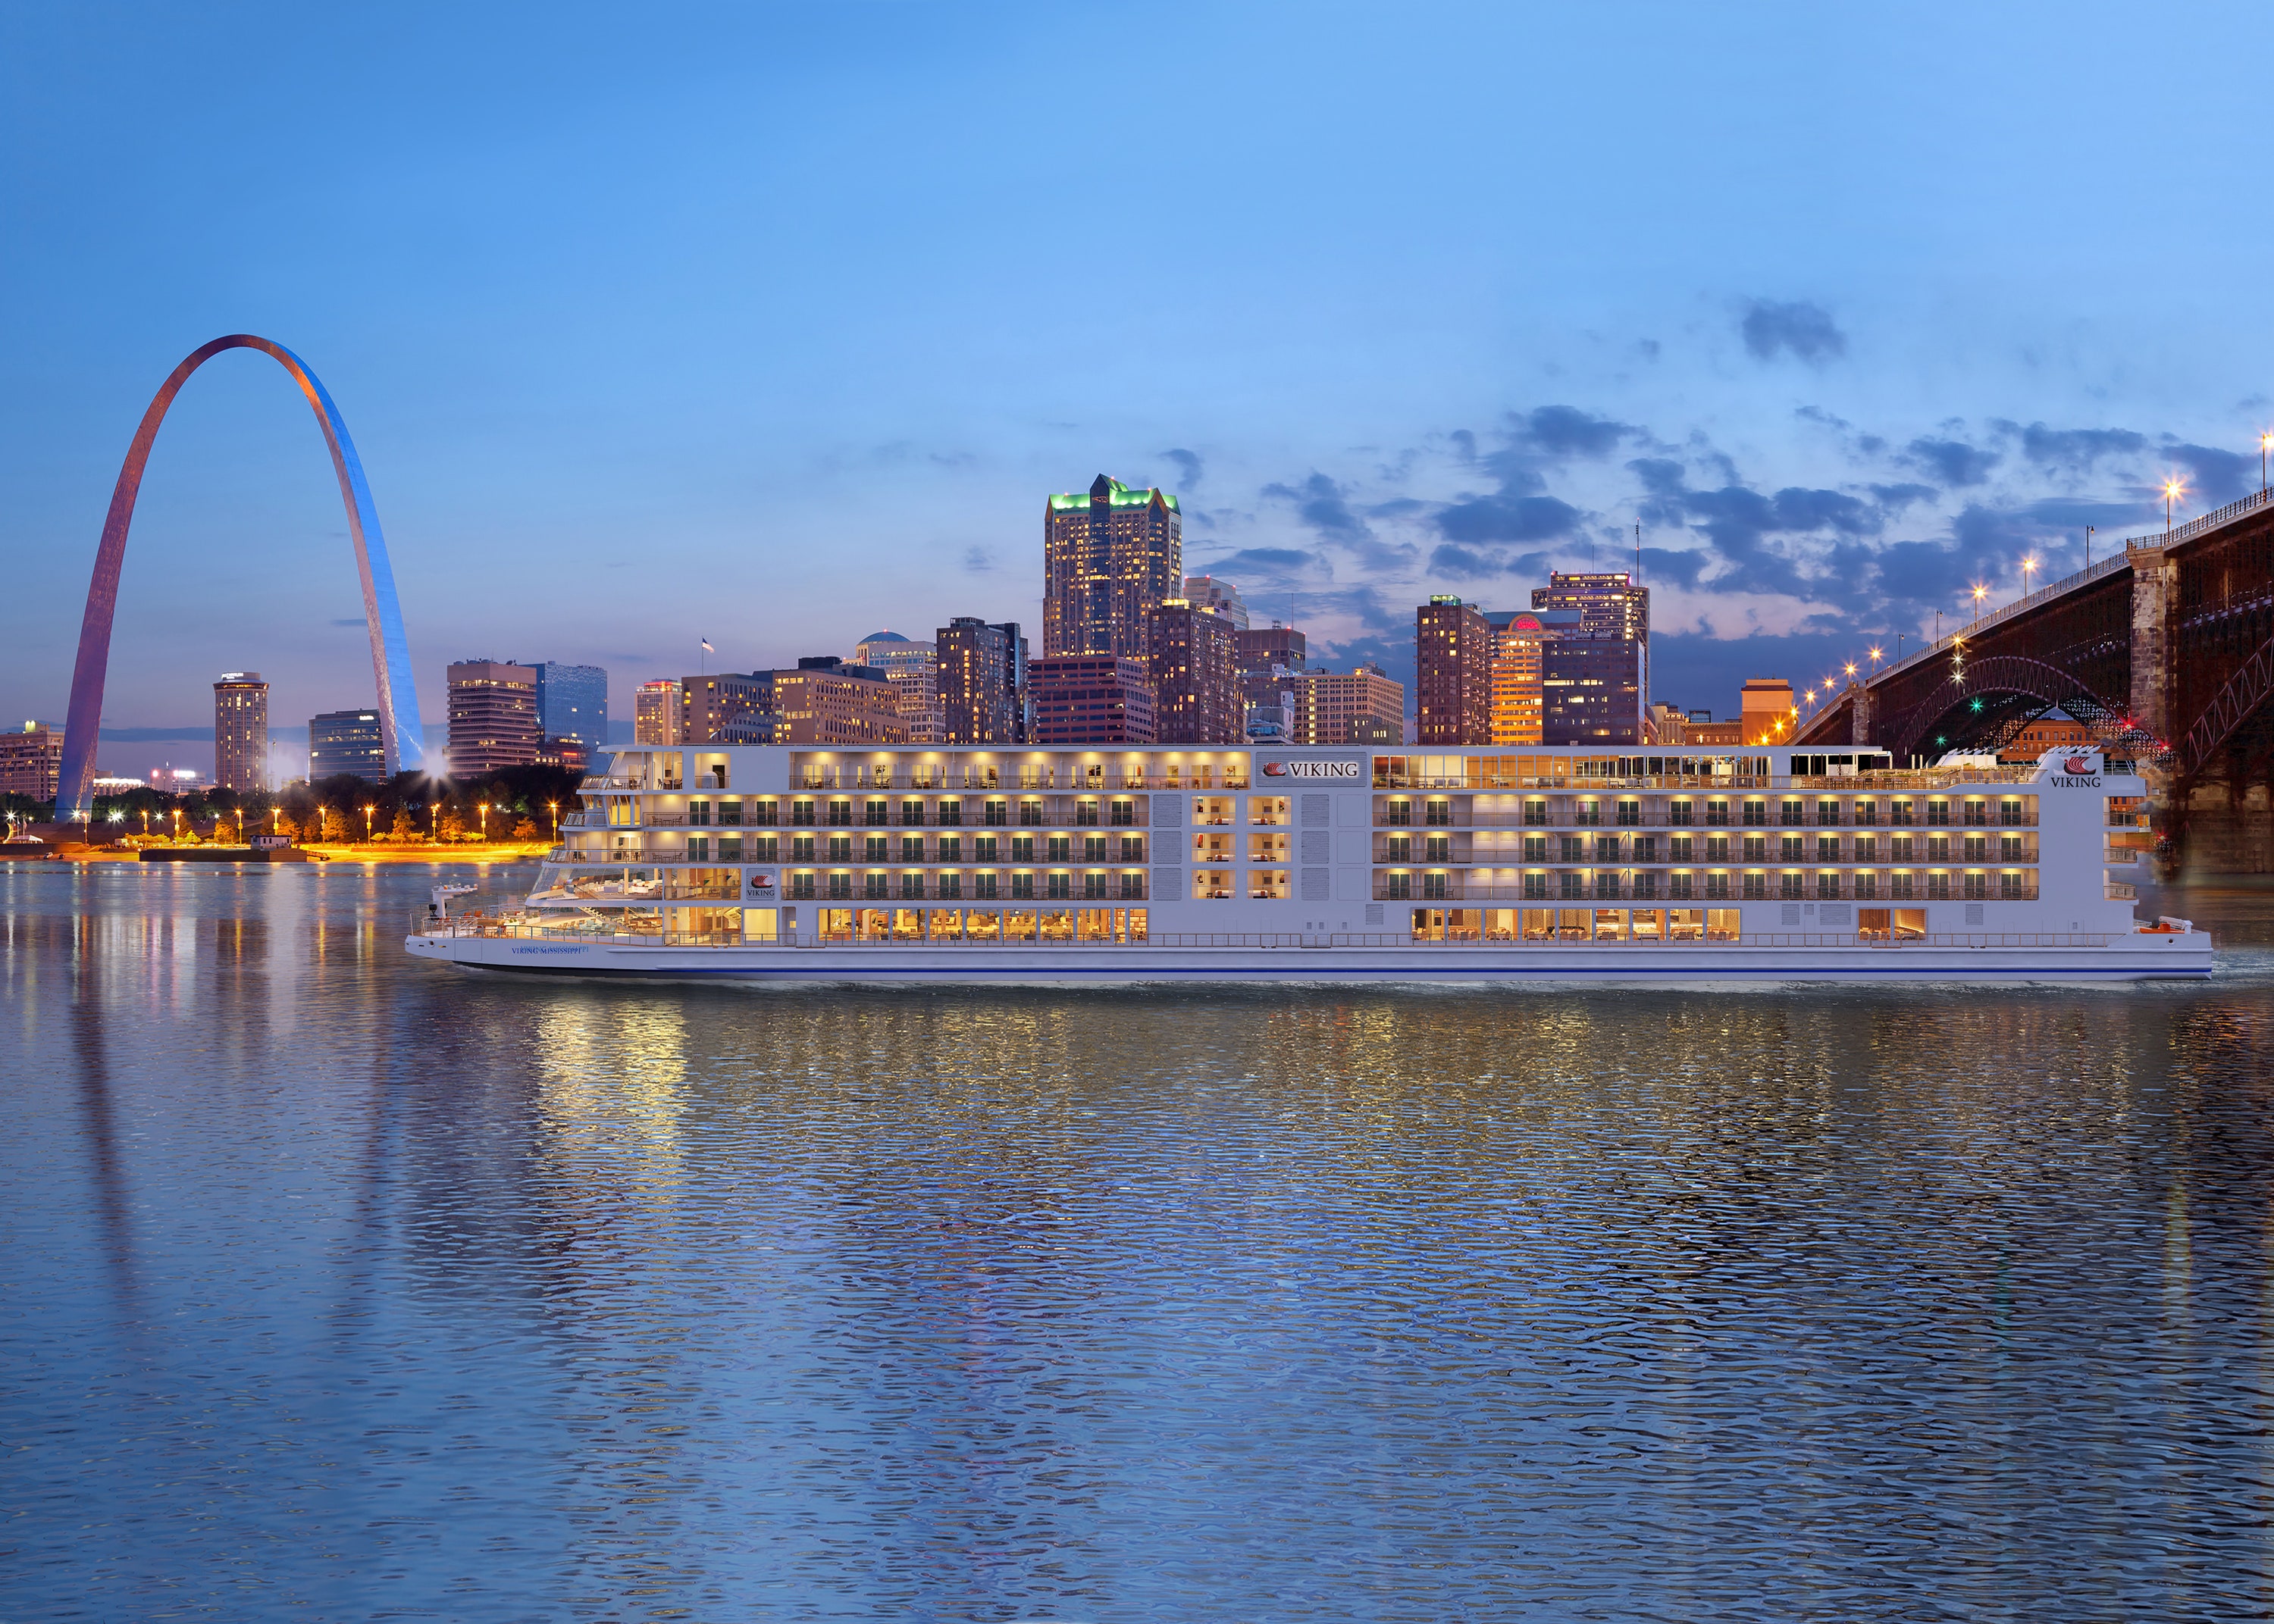 Of all the places to go for your birthday, we say hit a few at once by sailing into your twilight years with a tour of the Big Muddy. Last year, <a href="https://www.cntraveler.com/tag/viking-cruises?mbid=synd_msn_rss&utm_source=msn&utm_medium=syndication">Viking Cruises</a> unveiled <a href="https://www.vikingrivercruises.com/ships/mississippi/viking-mississippi.html"><em>Viking Mississippi</em></a>, a new vessel with 193 state rooms. The eight-day <a href="https://www.vikingrivercruises.com/cruise-destinations/mississippi/heart-of-the-delta/2023-neworleans-memphis/index.html">Heart of the Delta itinerary</a> runs between New Orleans and Memphis, with stops in Darrow, Baton Rouge, St. Francisville, Natchez, and Vicksburg. Optional excursions include a canoe tour of the Atchafalaya Basin and a visit to one of the Civil War’s most pivotal battlefields.<p>Sign up to receive the latest news, expert tips, and inspiration on all things travel.</p><a href="https://www.cntraveler.com/newsletter/the-daily?sourceCode=msnsend">Inspire Me</a>